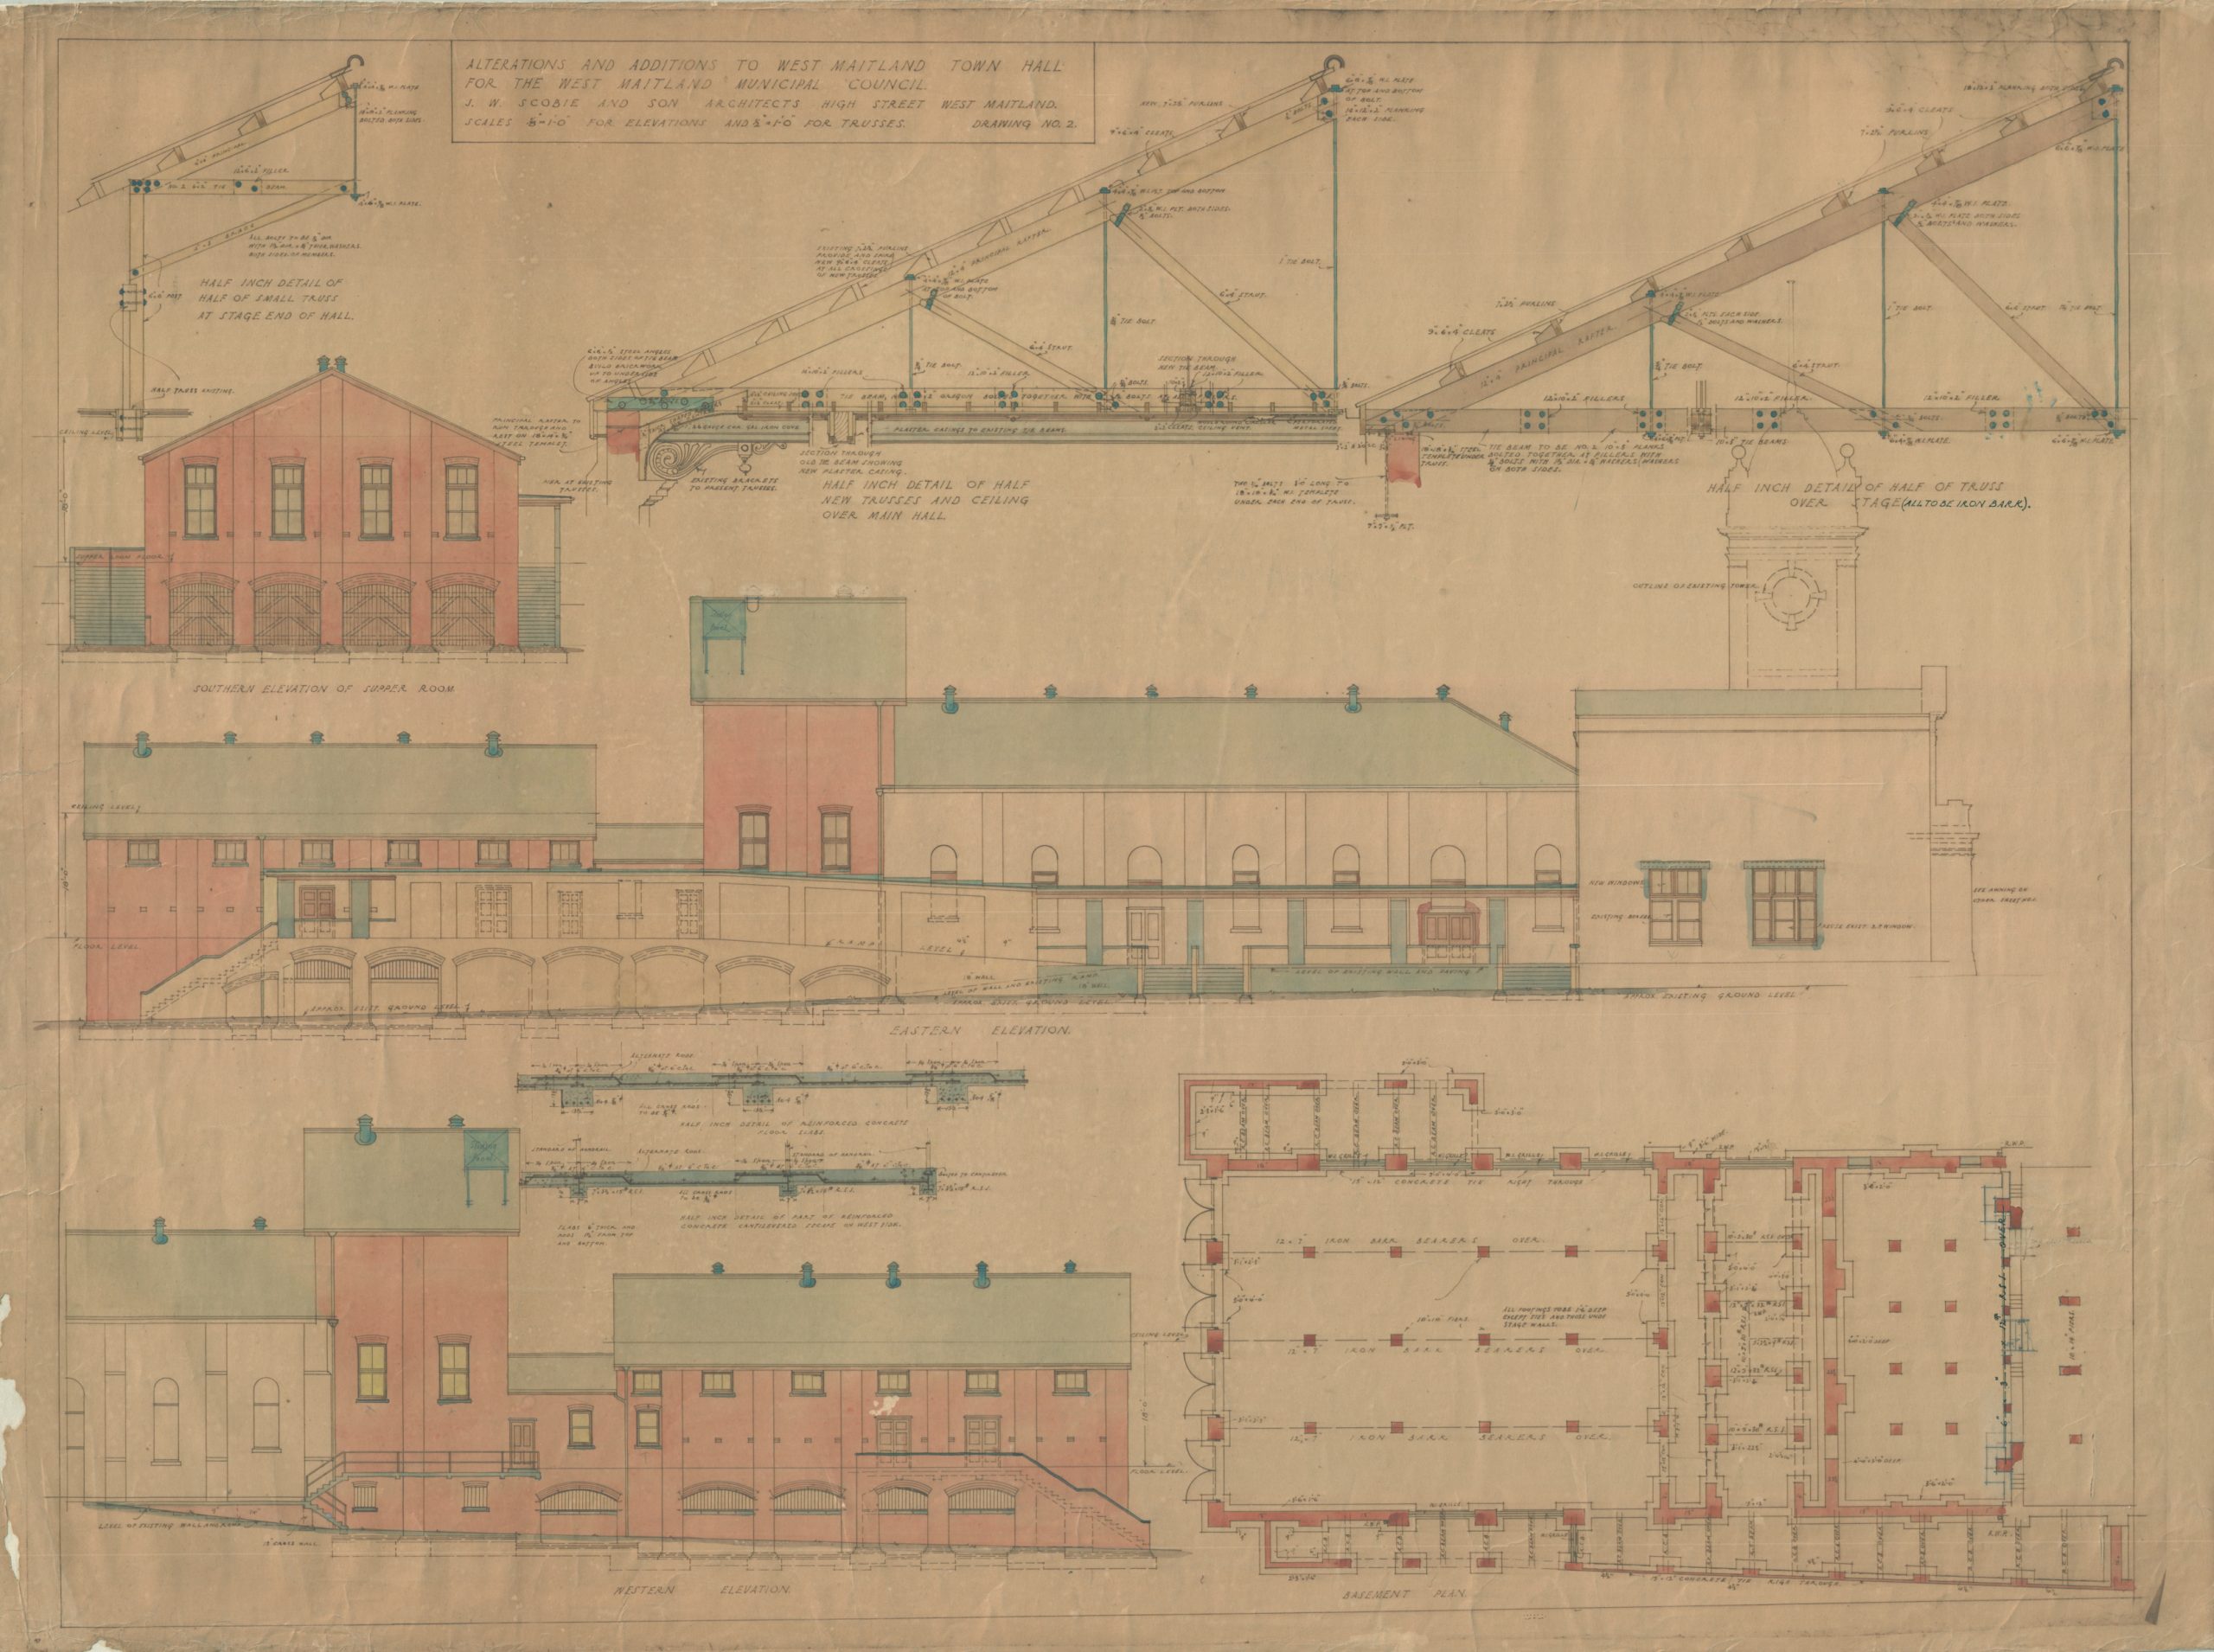 hand-drawn architectural plan for West Maitland Town Hall depicting a floor plan alongside various cross-sections